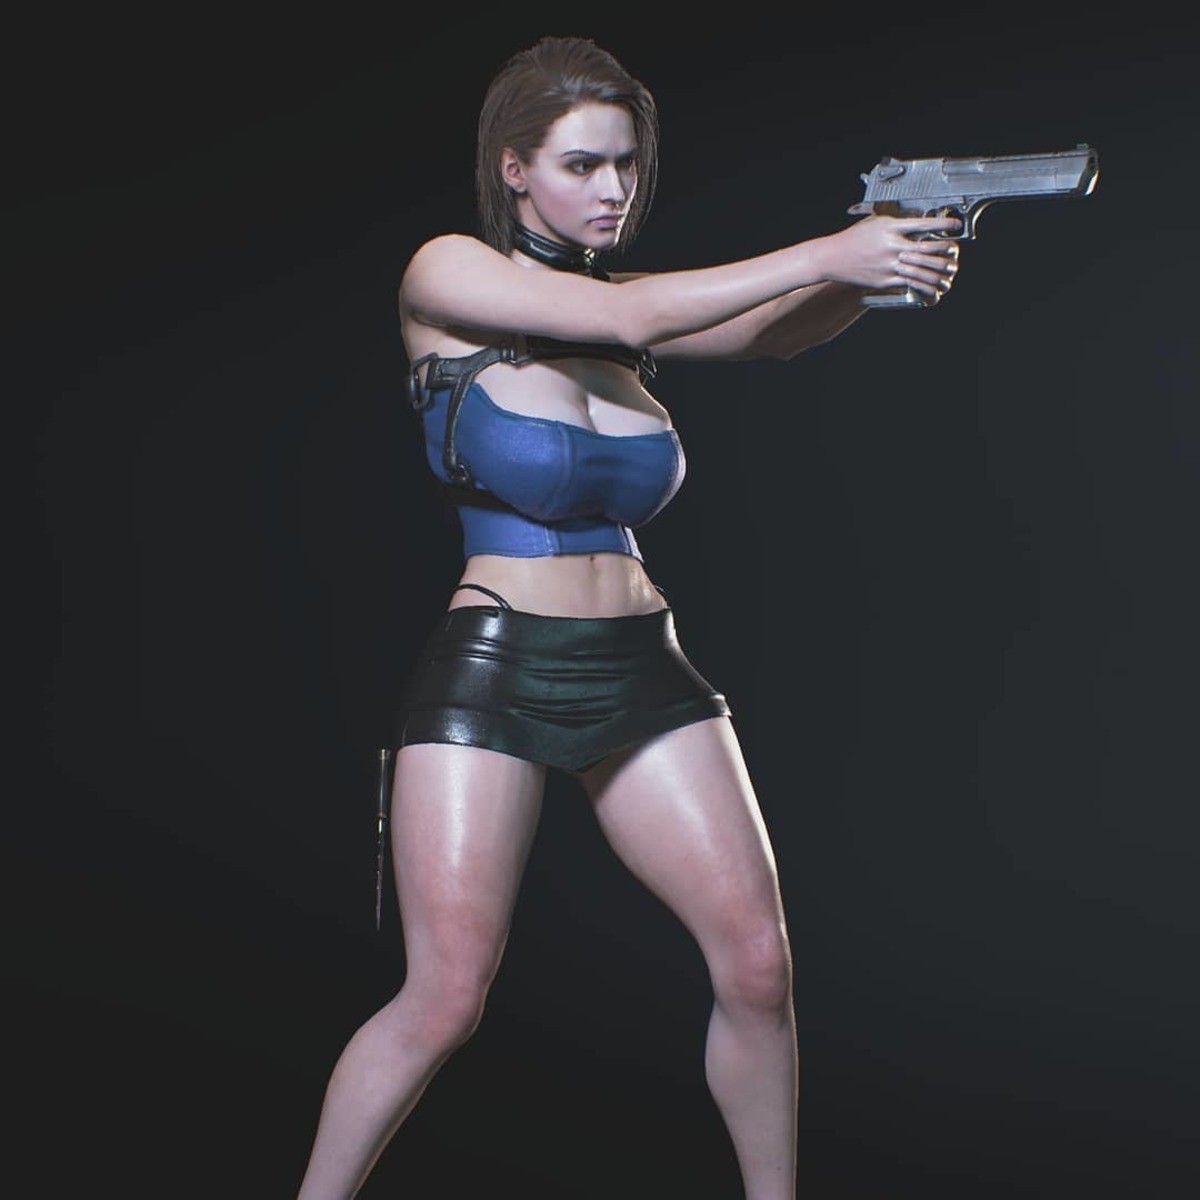 Resident Evil 3 Remake busty Jill Valentine mod. Mod source: .. she looks like an actual prostitute